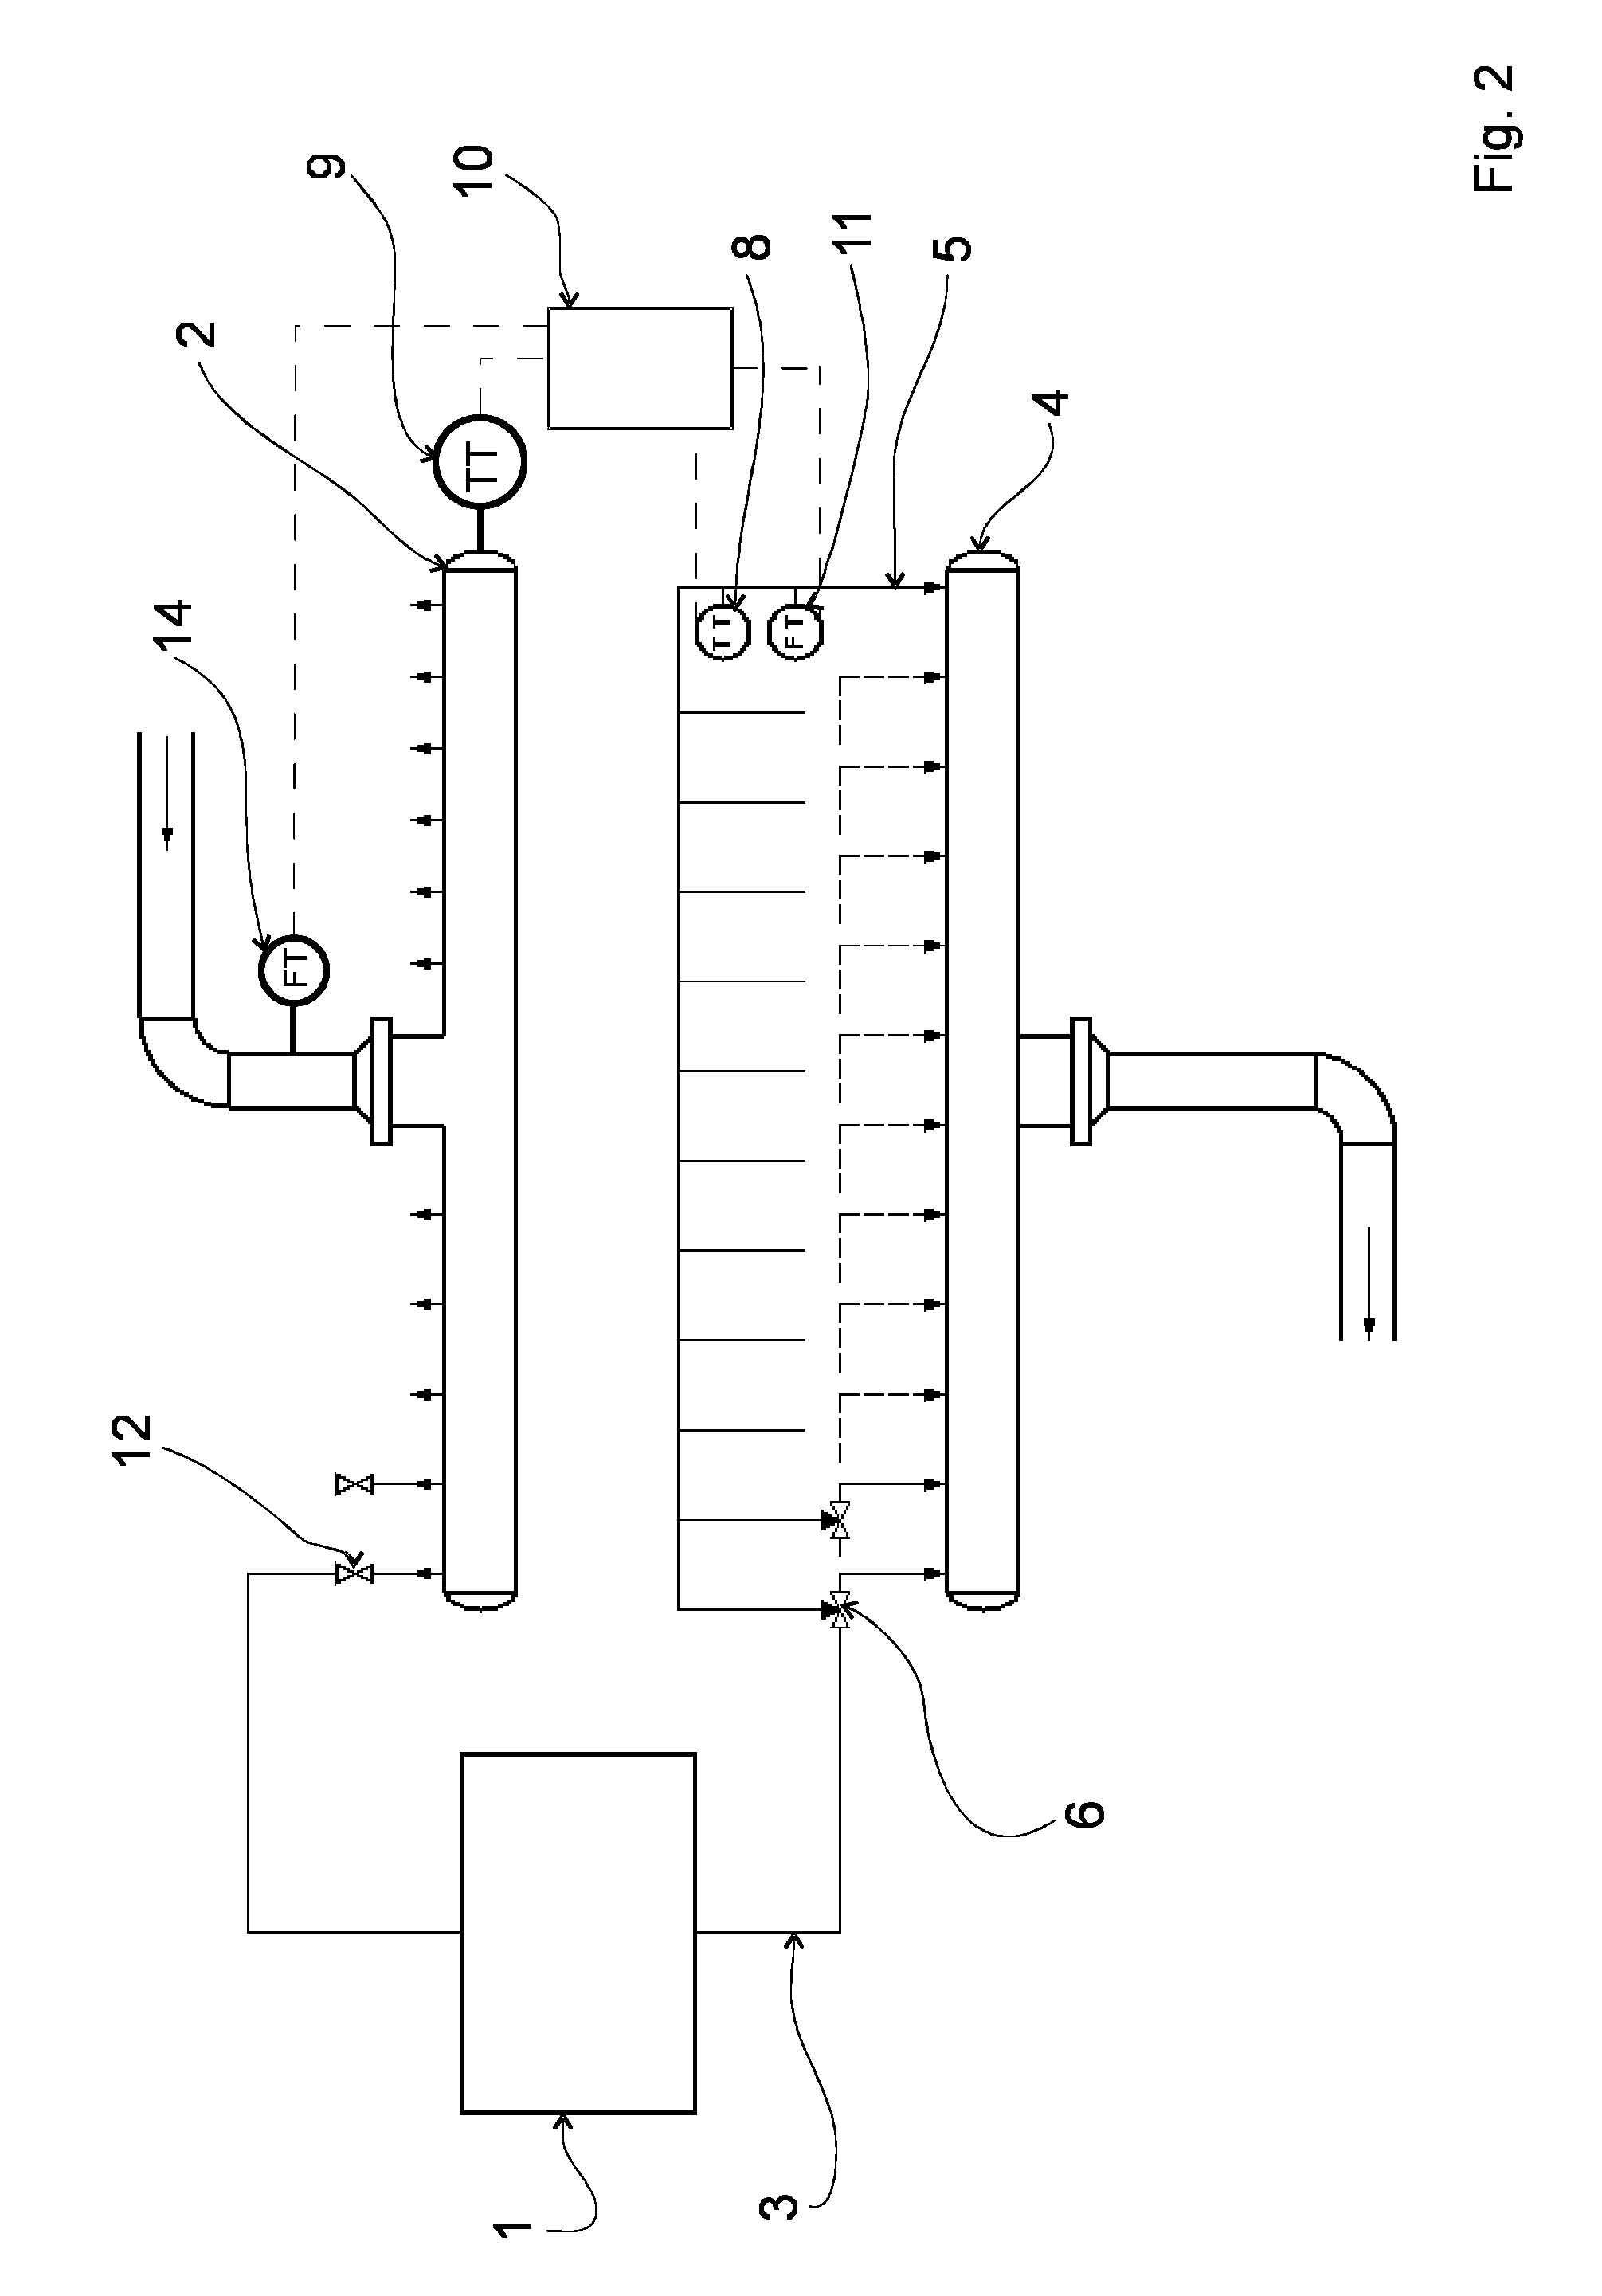 Method and arrangement for measuring at least one physical magnitude, such as temperature, flow or pressure of the cooling fluid flowing in an individual cooling element cycle of a cooling element in a metallurgical furnace